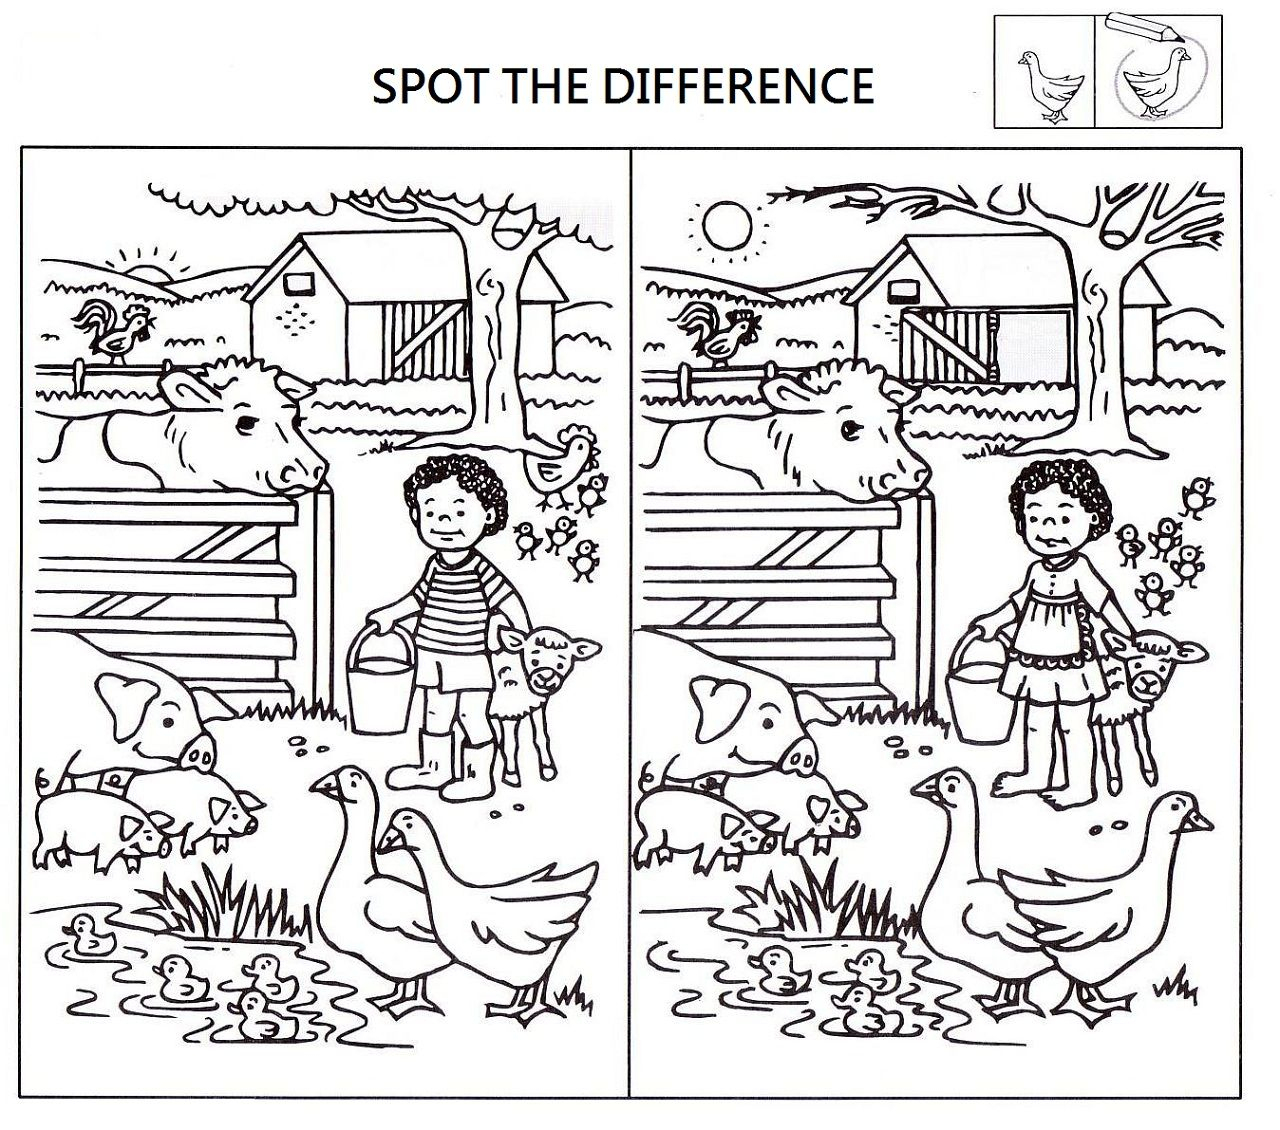 Spot The Difference Worksheets For Kids | Kids Worksheets Printable | Spot The Difference Printable Worksheets For Adults